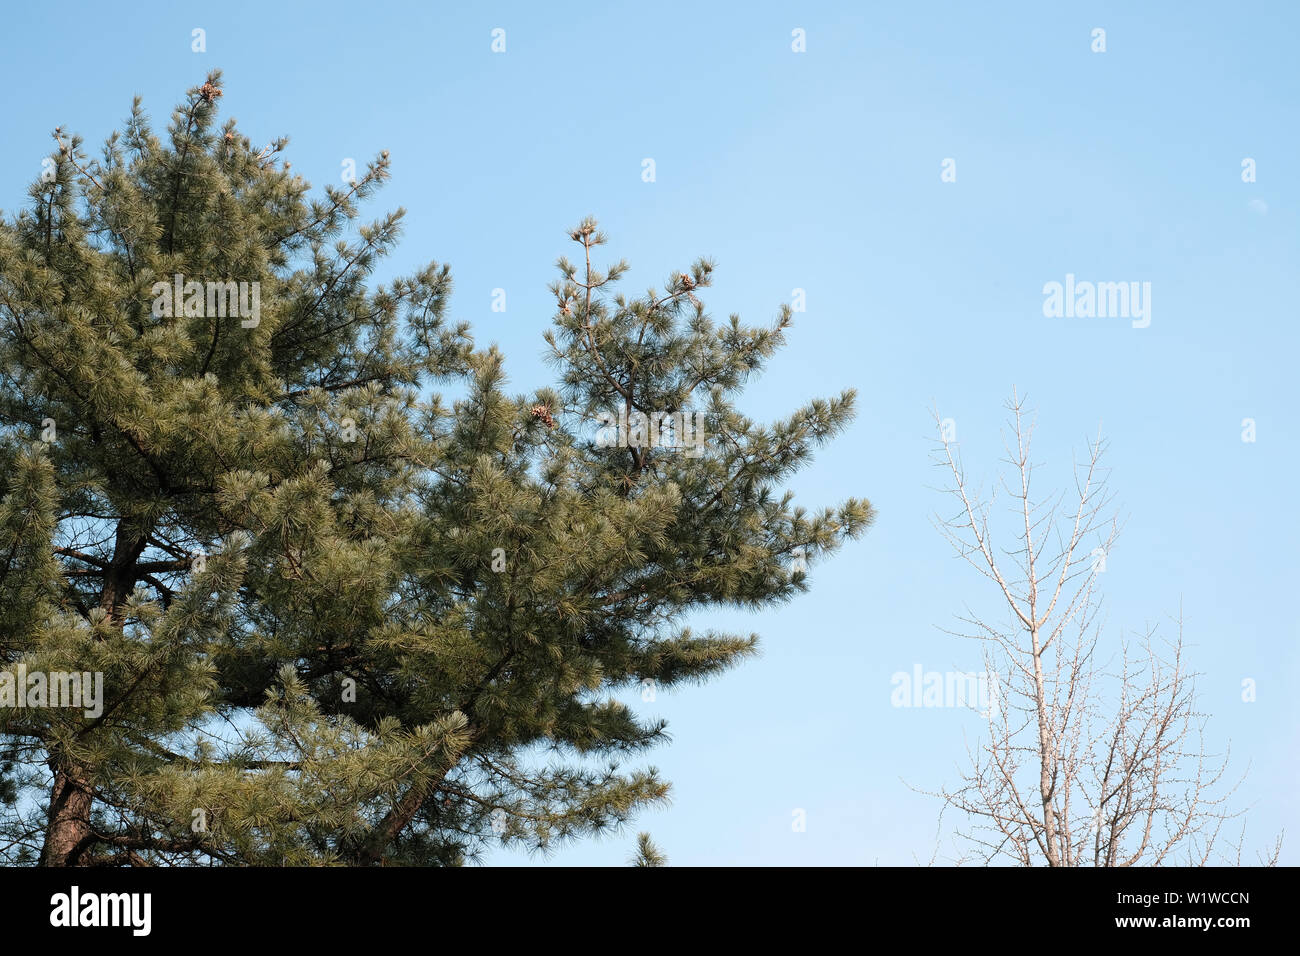 Plants part of pine branch and dry tree in Seoul Stock Photo